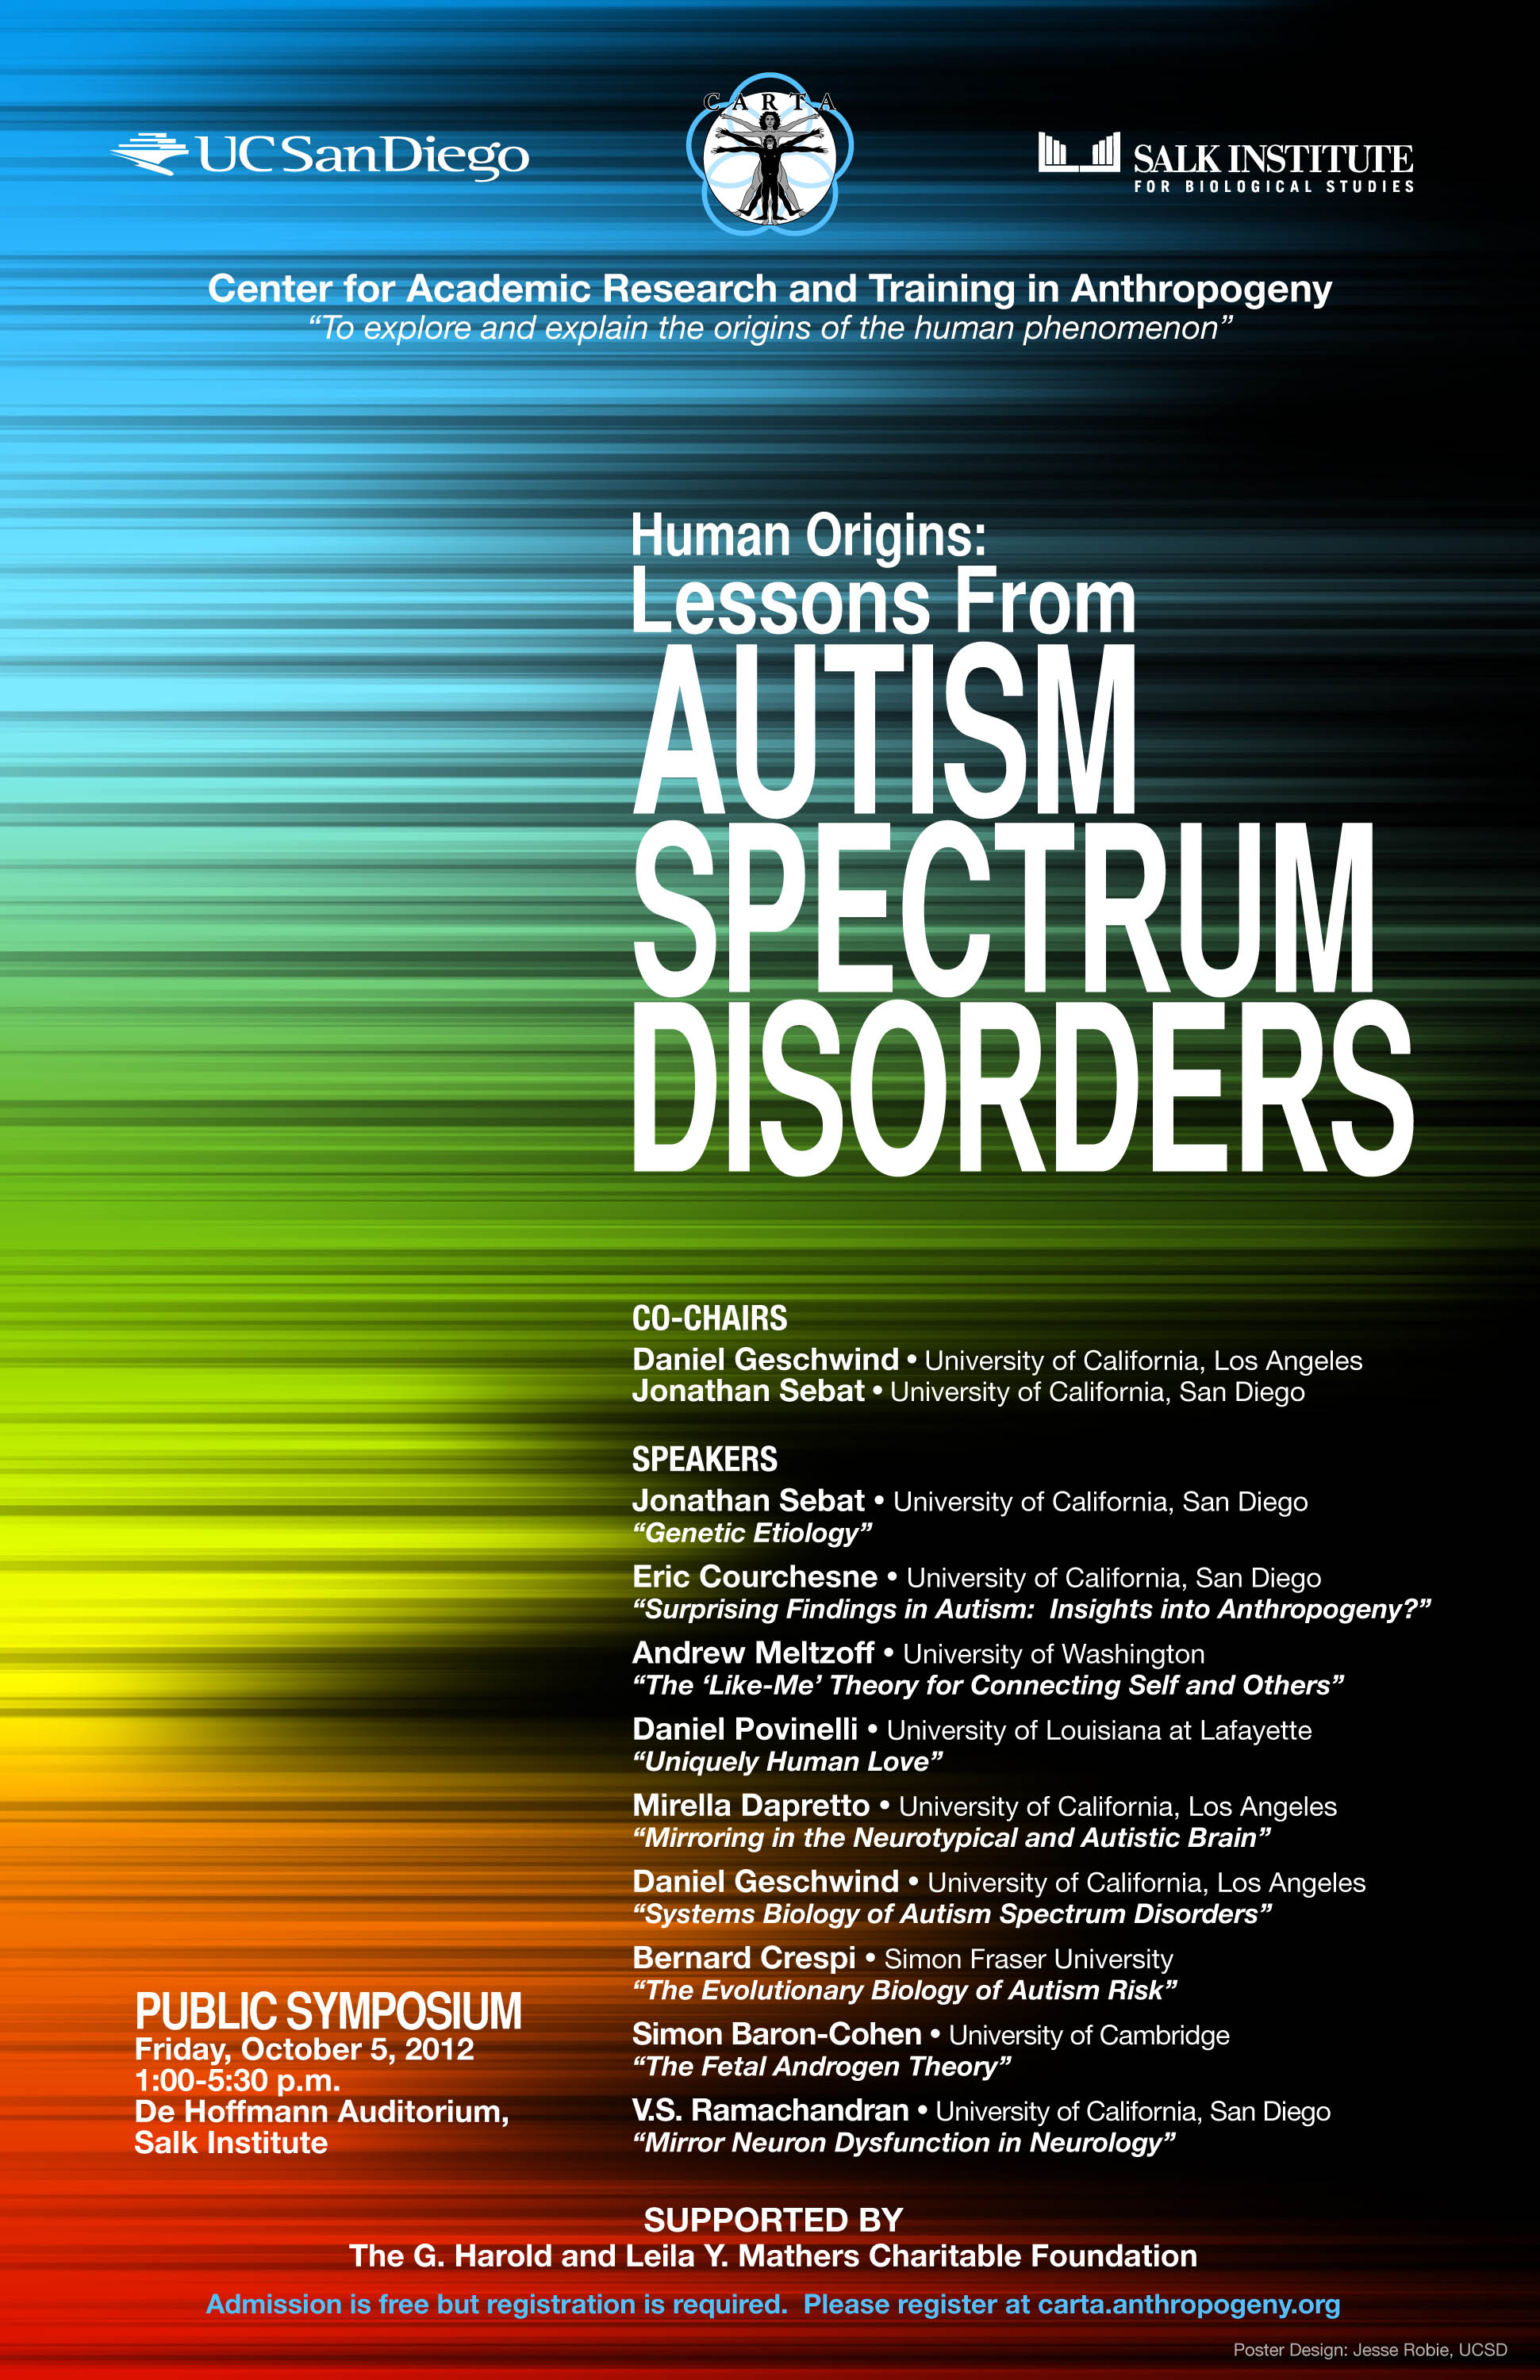 Human Origins: Lessons from Autism Spectrum Disorders